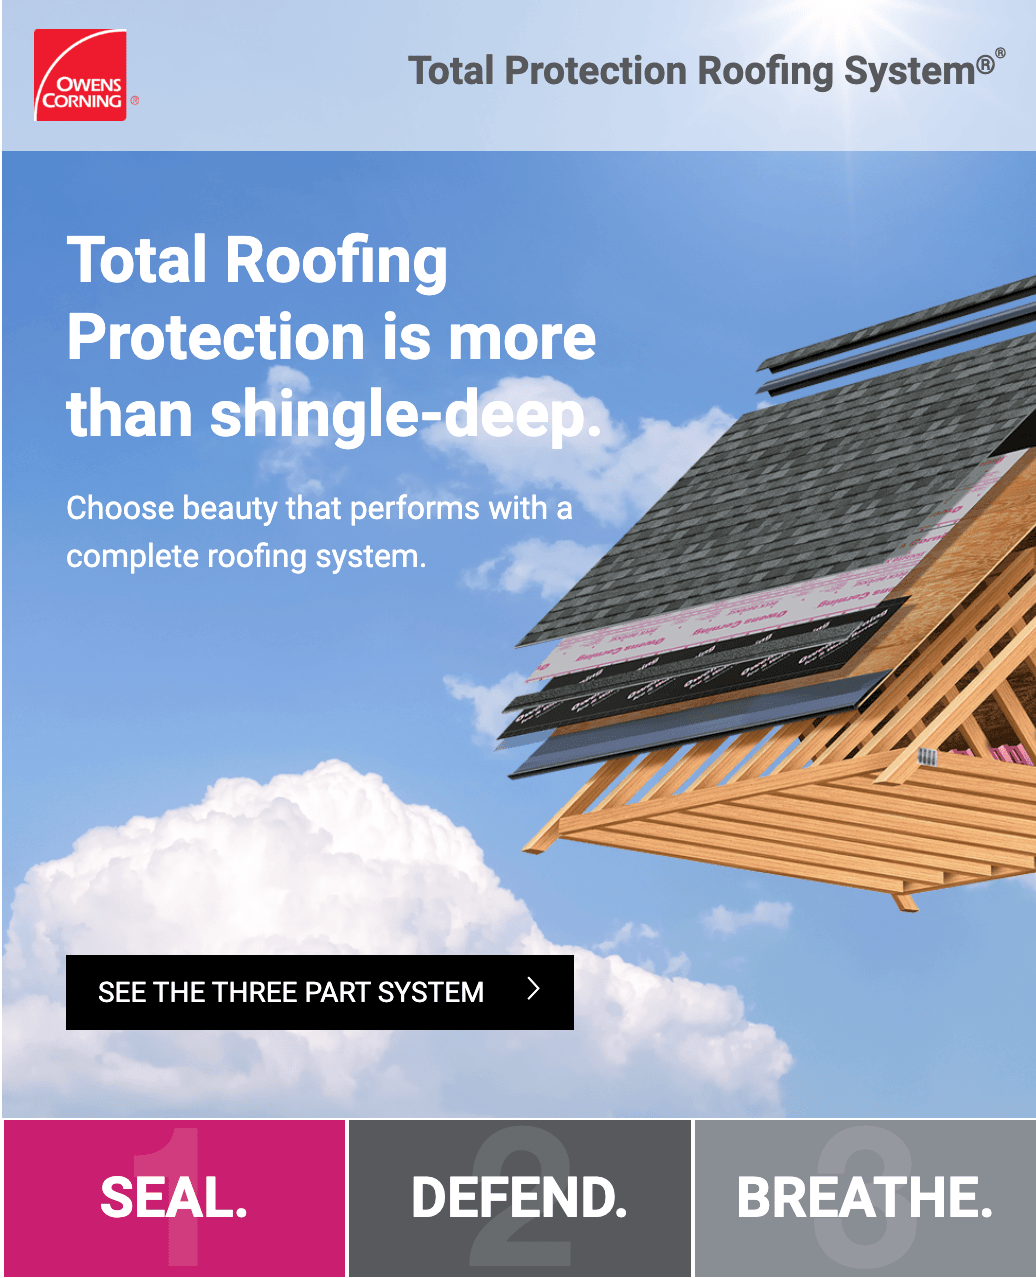 Total Protection Roofing System